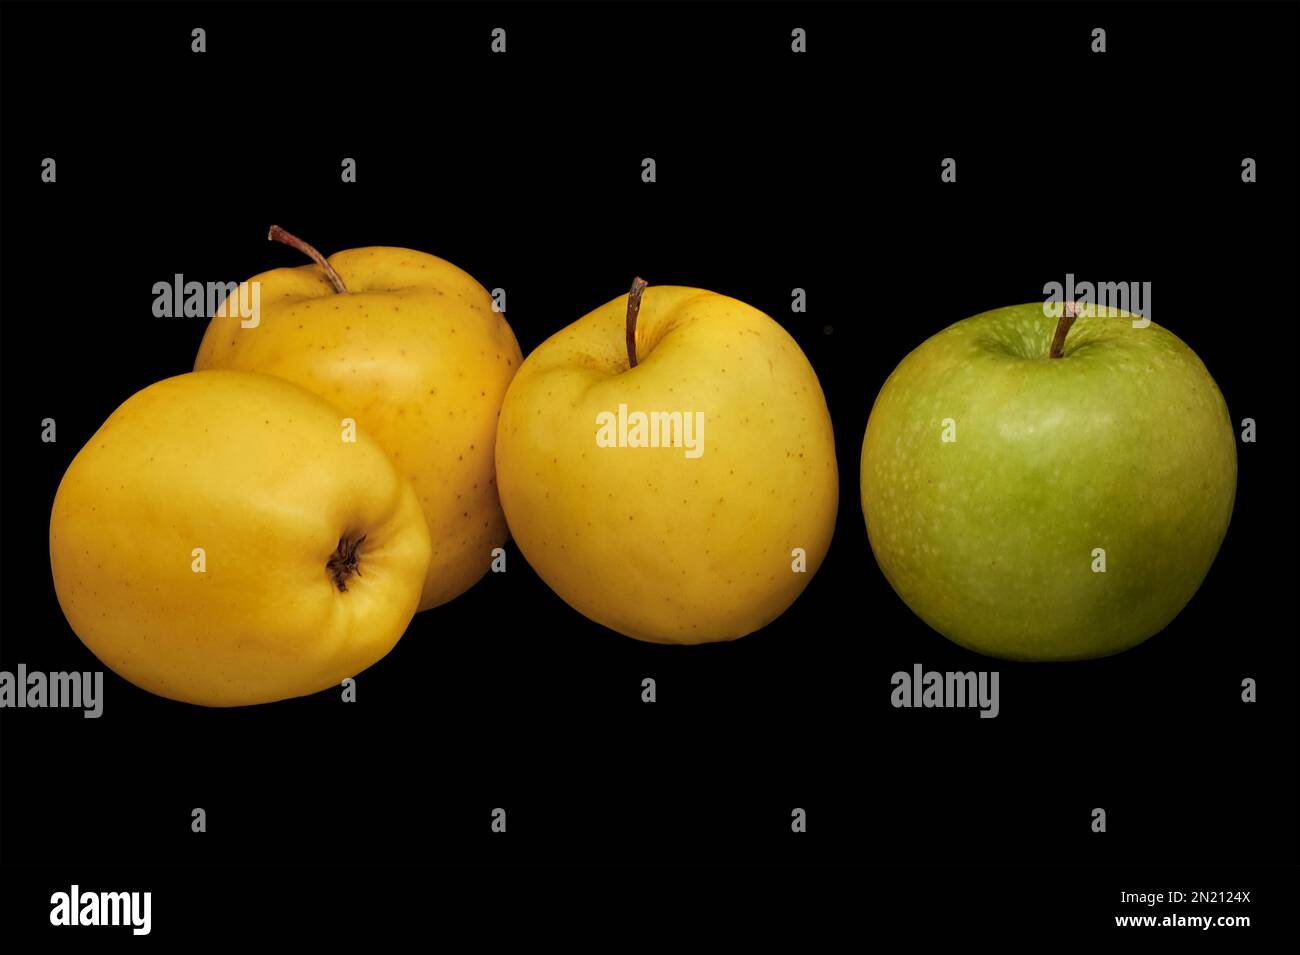 Image of three yellow apples and one green on a black background Stock Photo